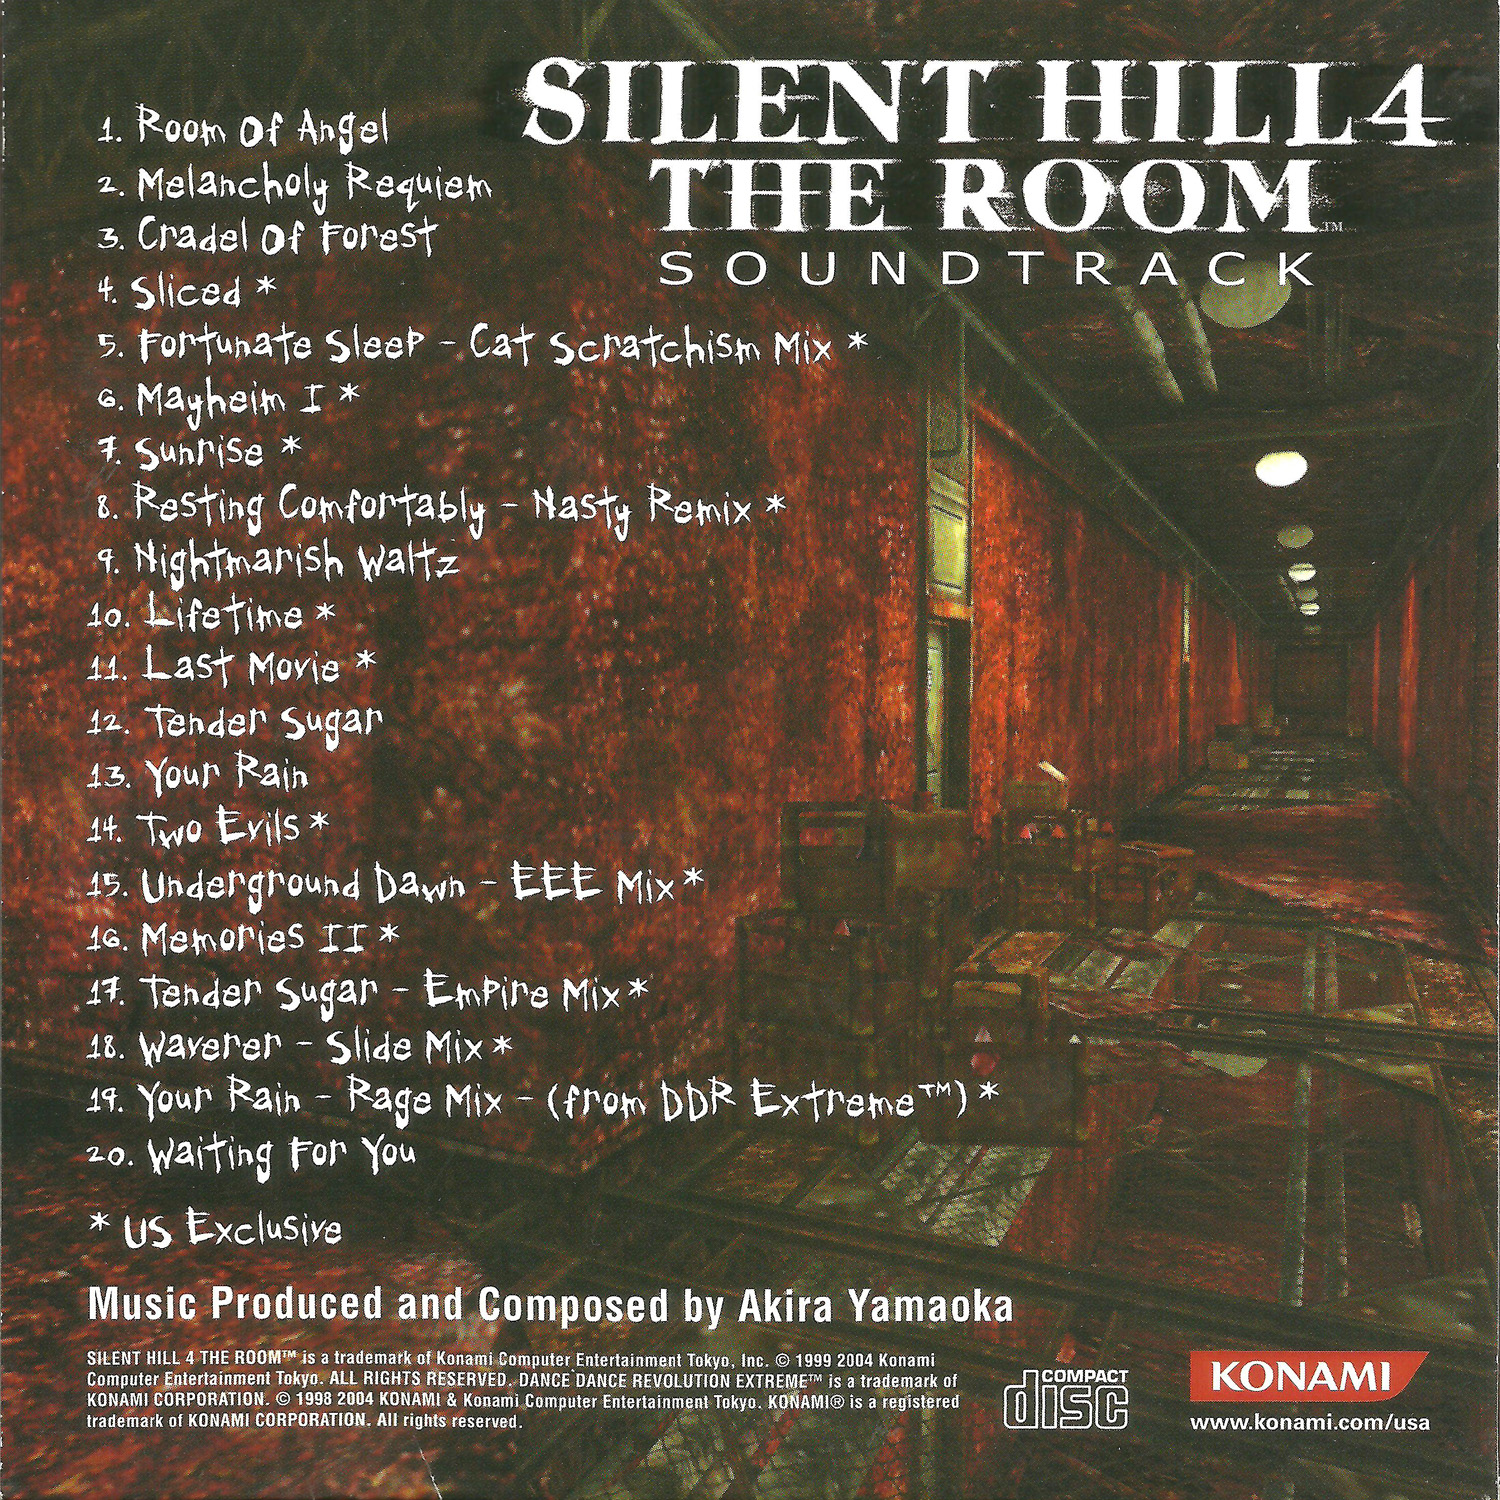 SILENT HILL 4 THE ROOM LIMITED EDITION SOUNDTRACK (2004) MP3 